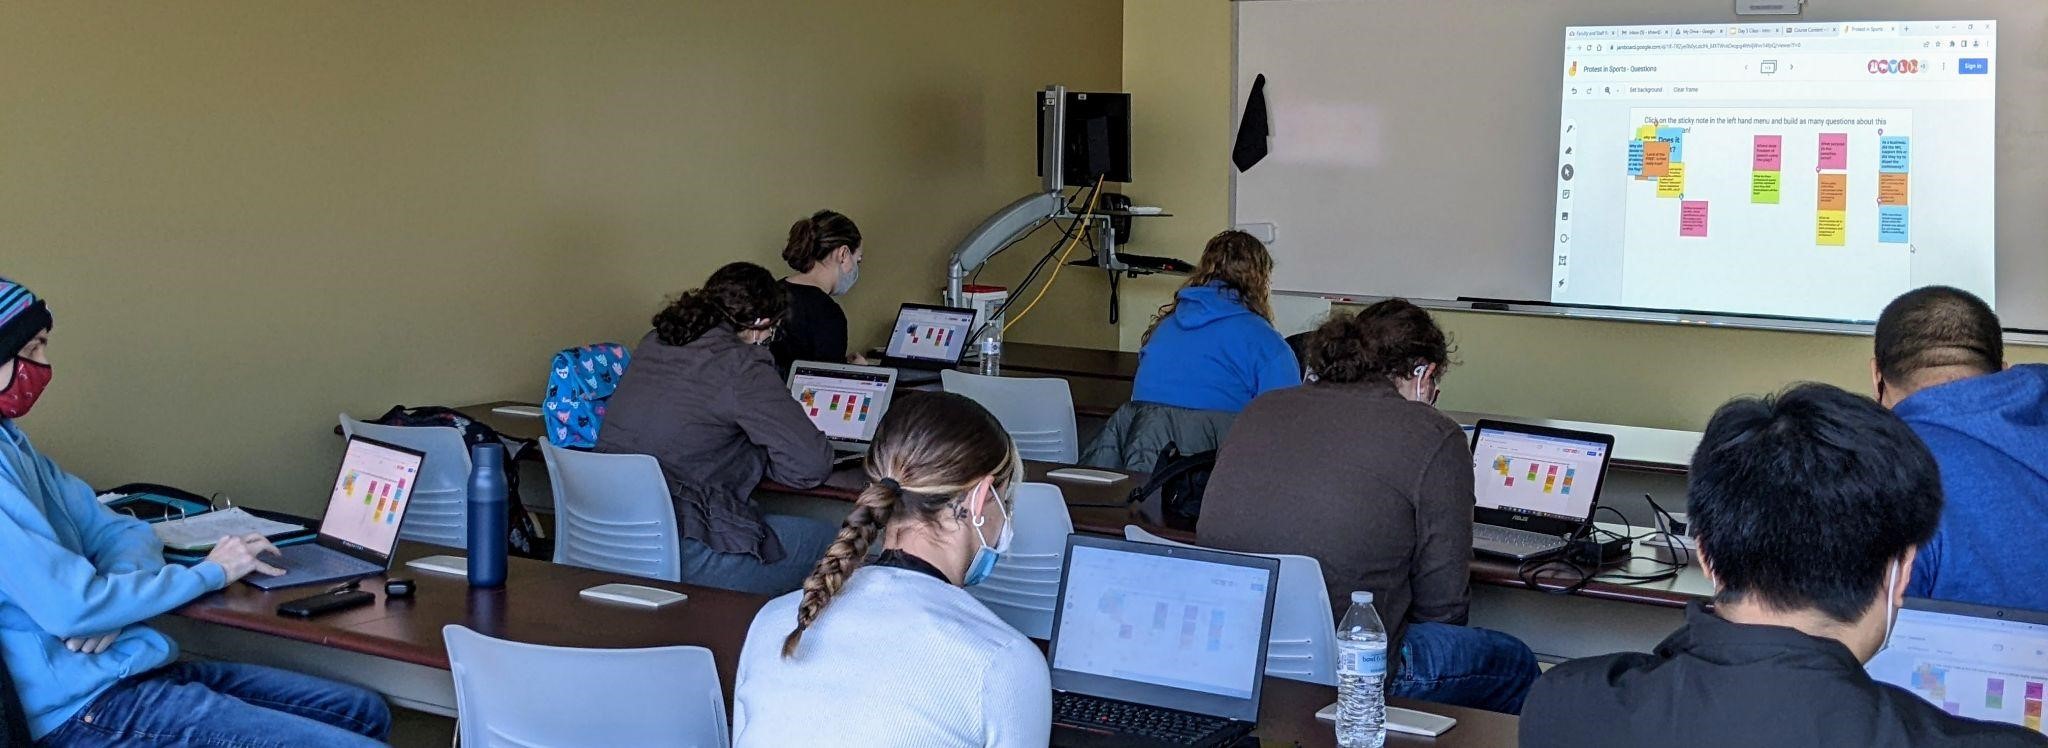 Students using post-it note program on laptops during class.